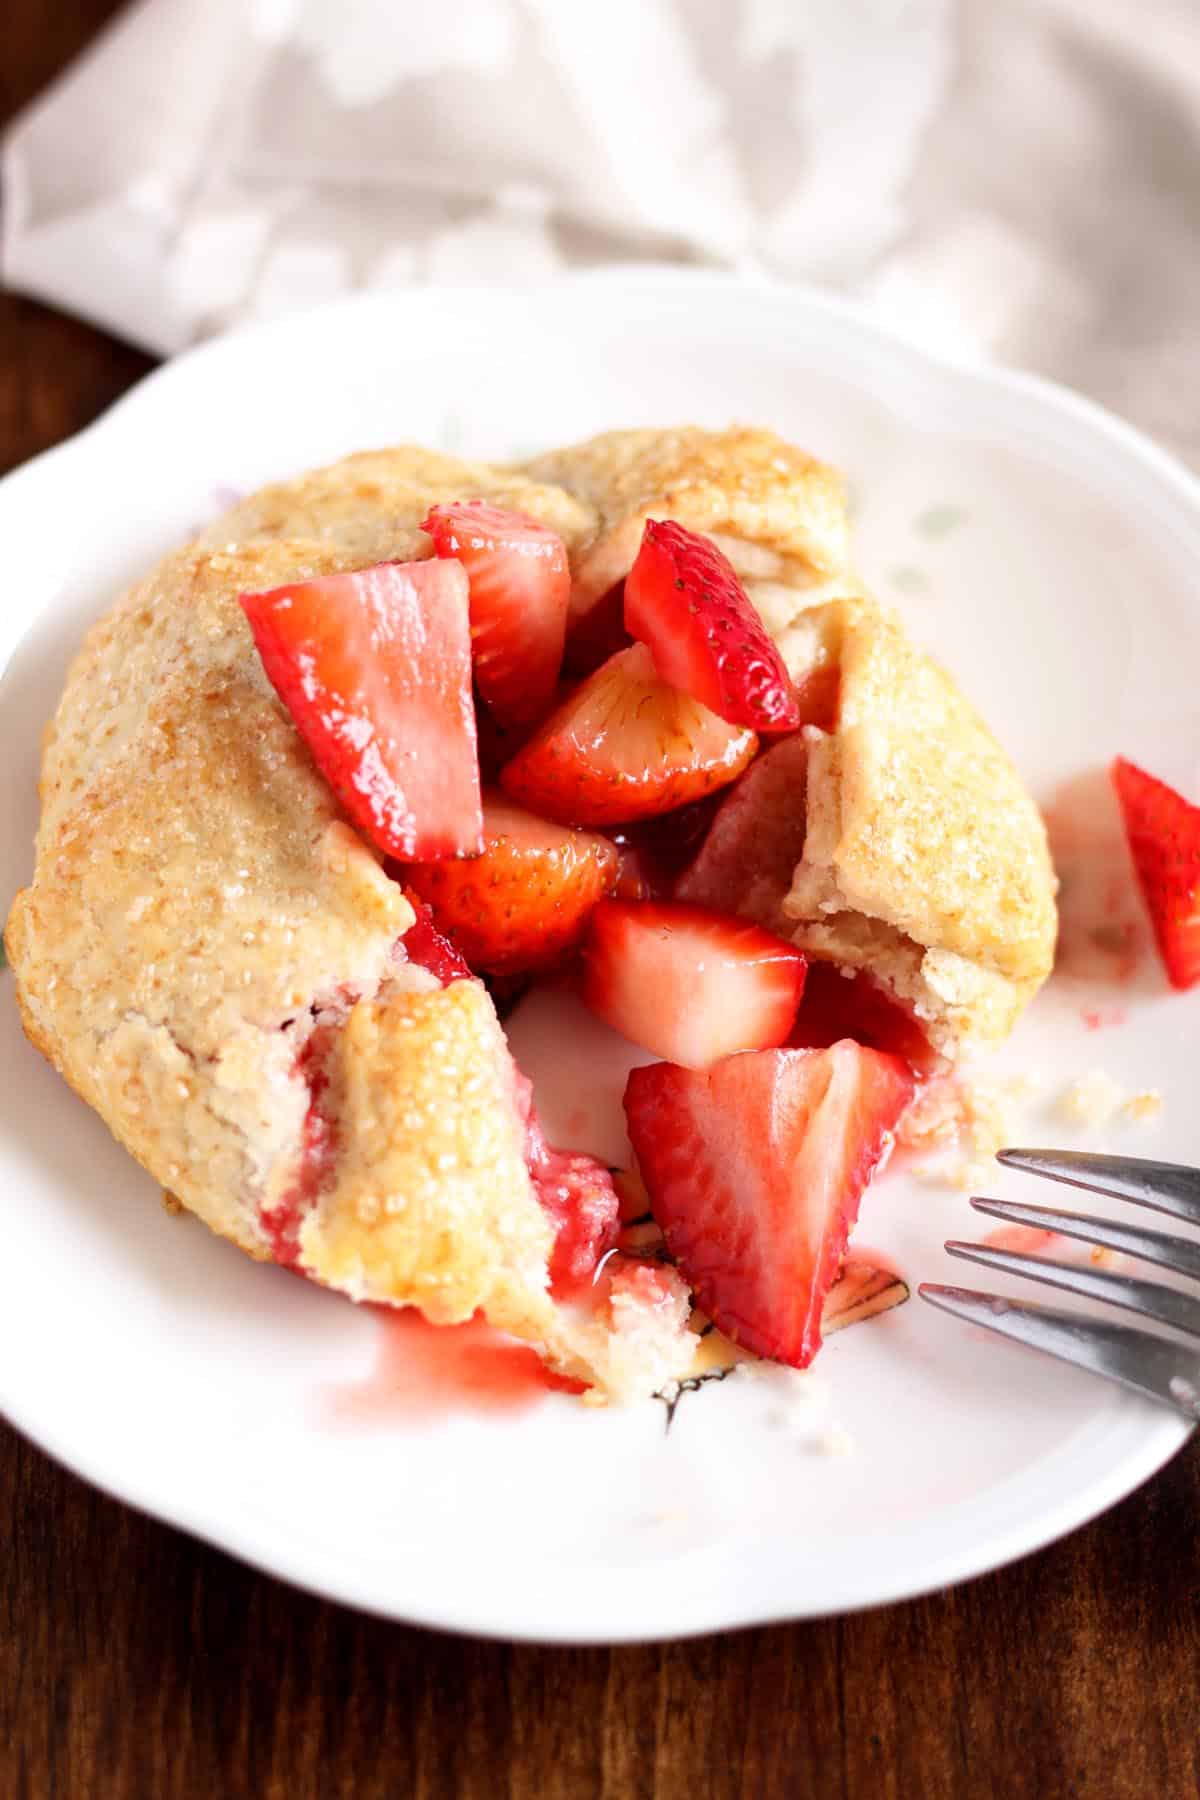 A strawberry galette on a plate being cut into.